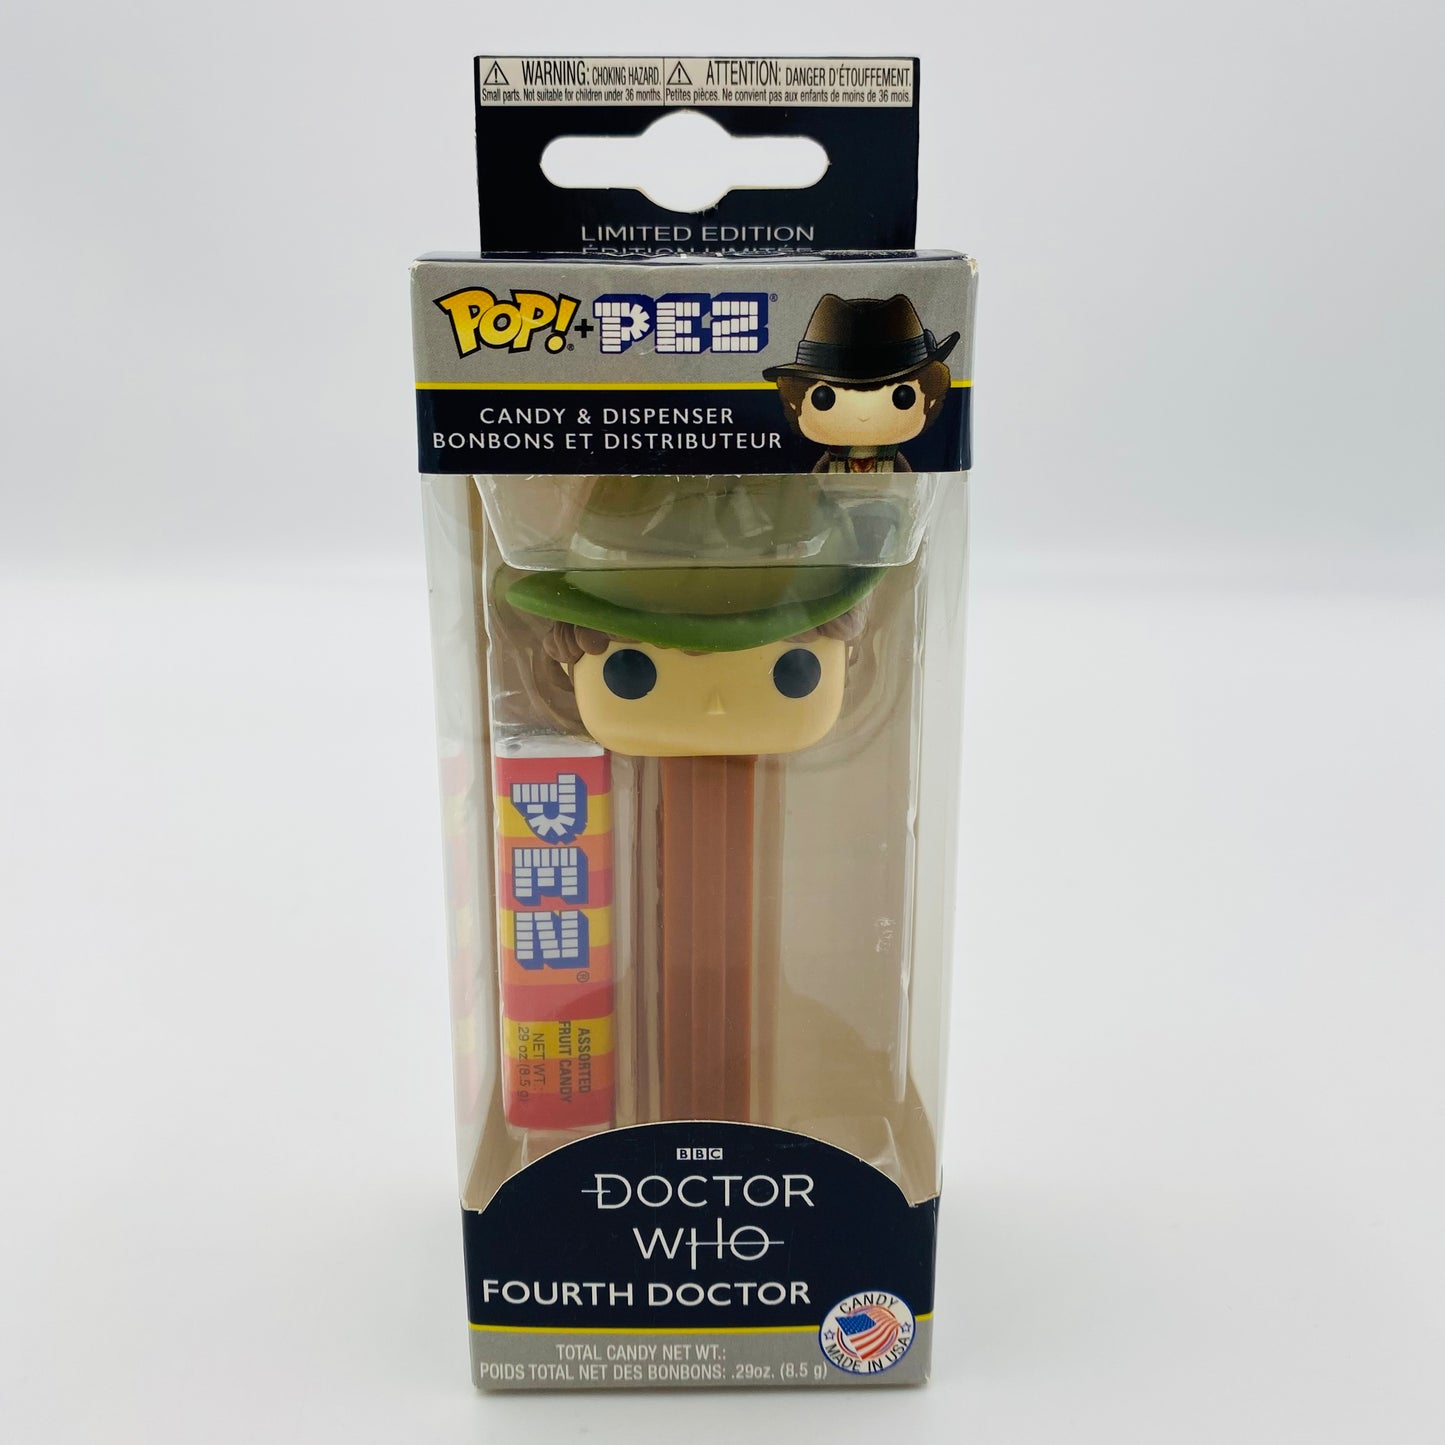 Doctor Who Fourth Doctor Pop! + PEZ dispenser (2018) boxed